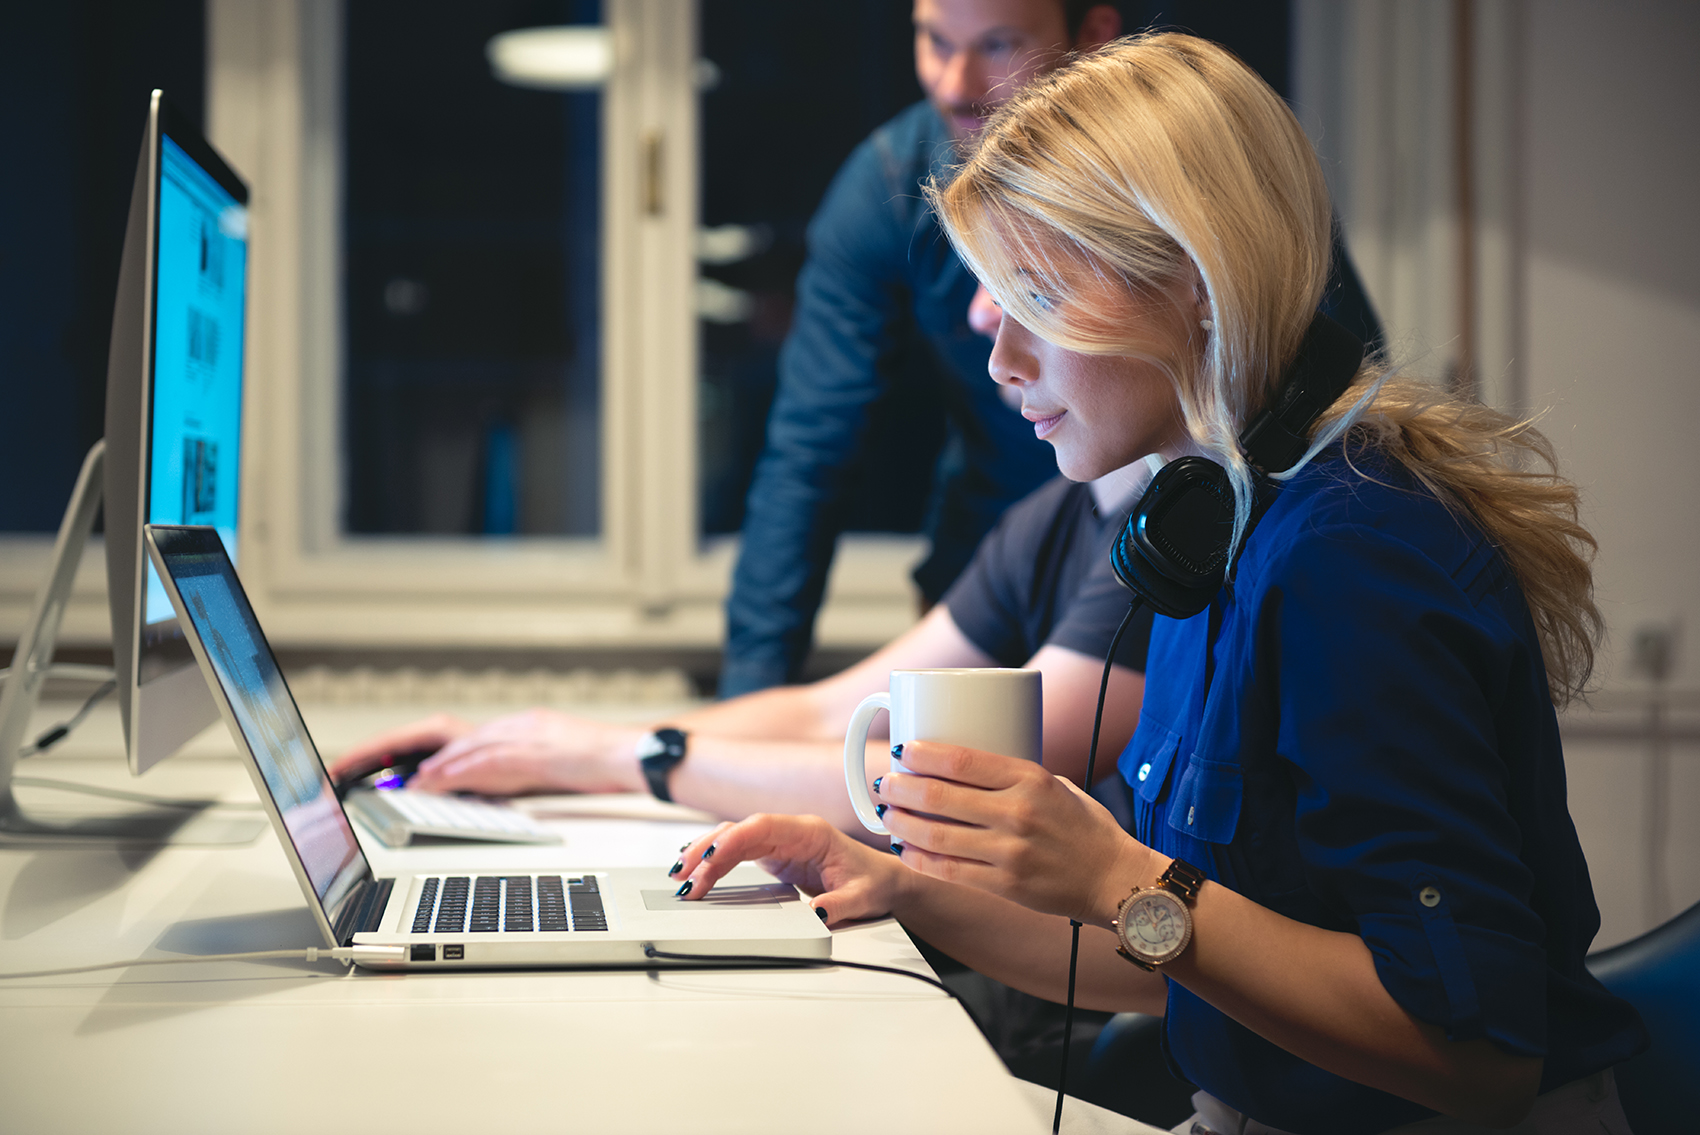 Blond woman typing on laptop with headphones on ears and her coworkers are defocused in background.